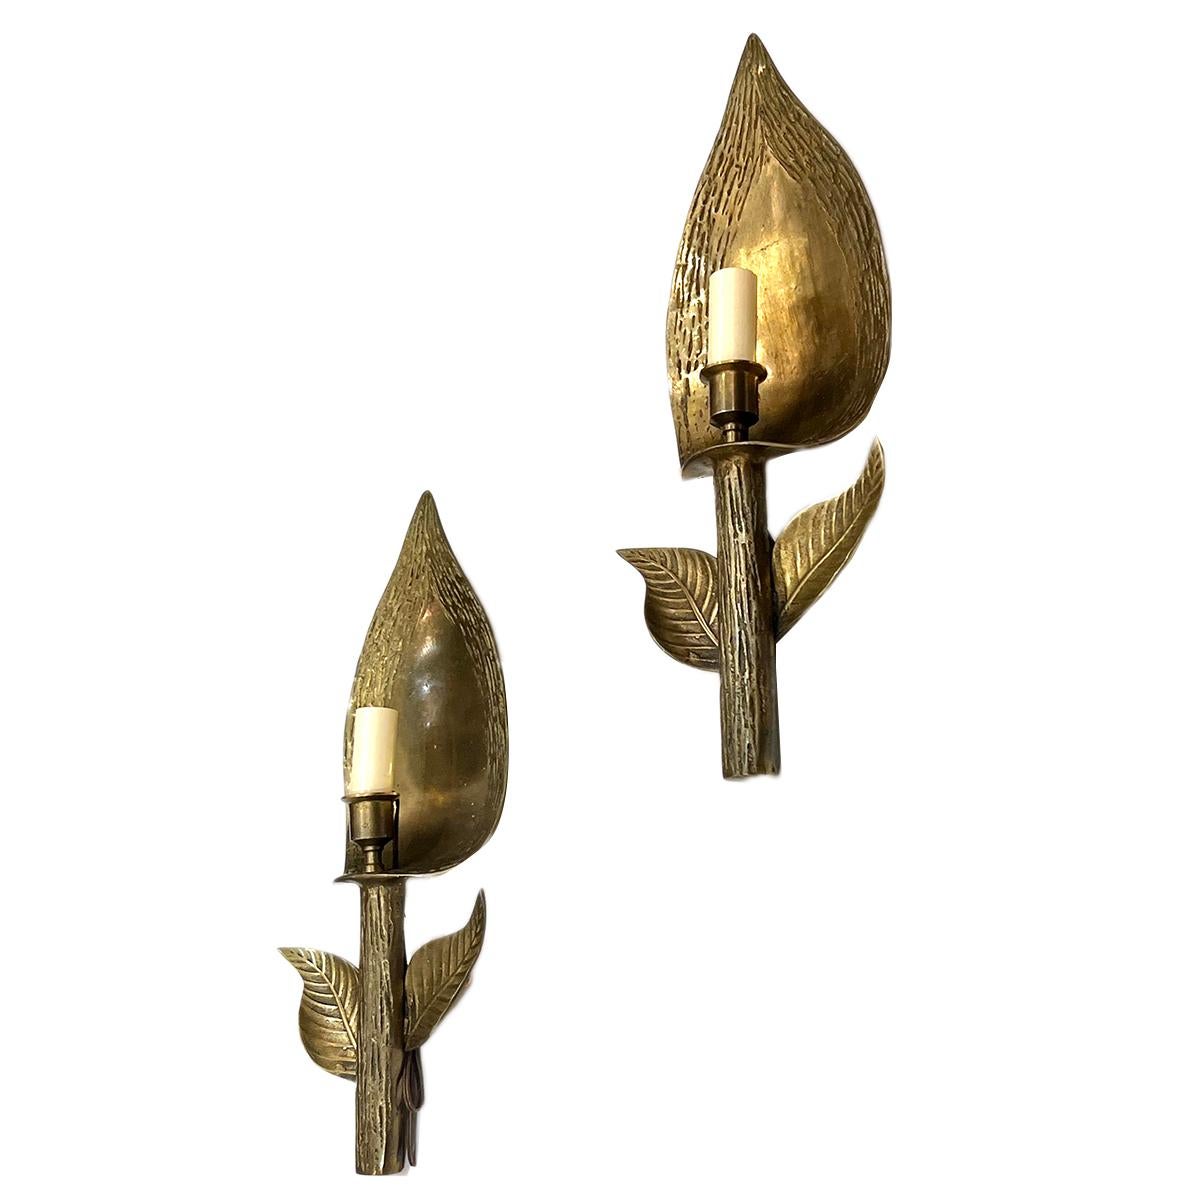 Pair of Italian circa 1960's patinated bronze sconces with foliage motif.

Measurements:
Height: 15